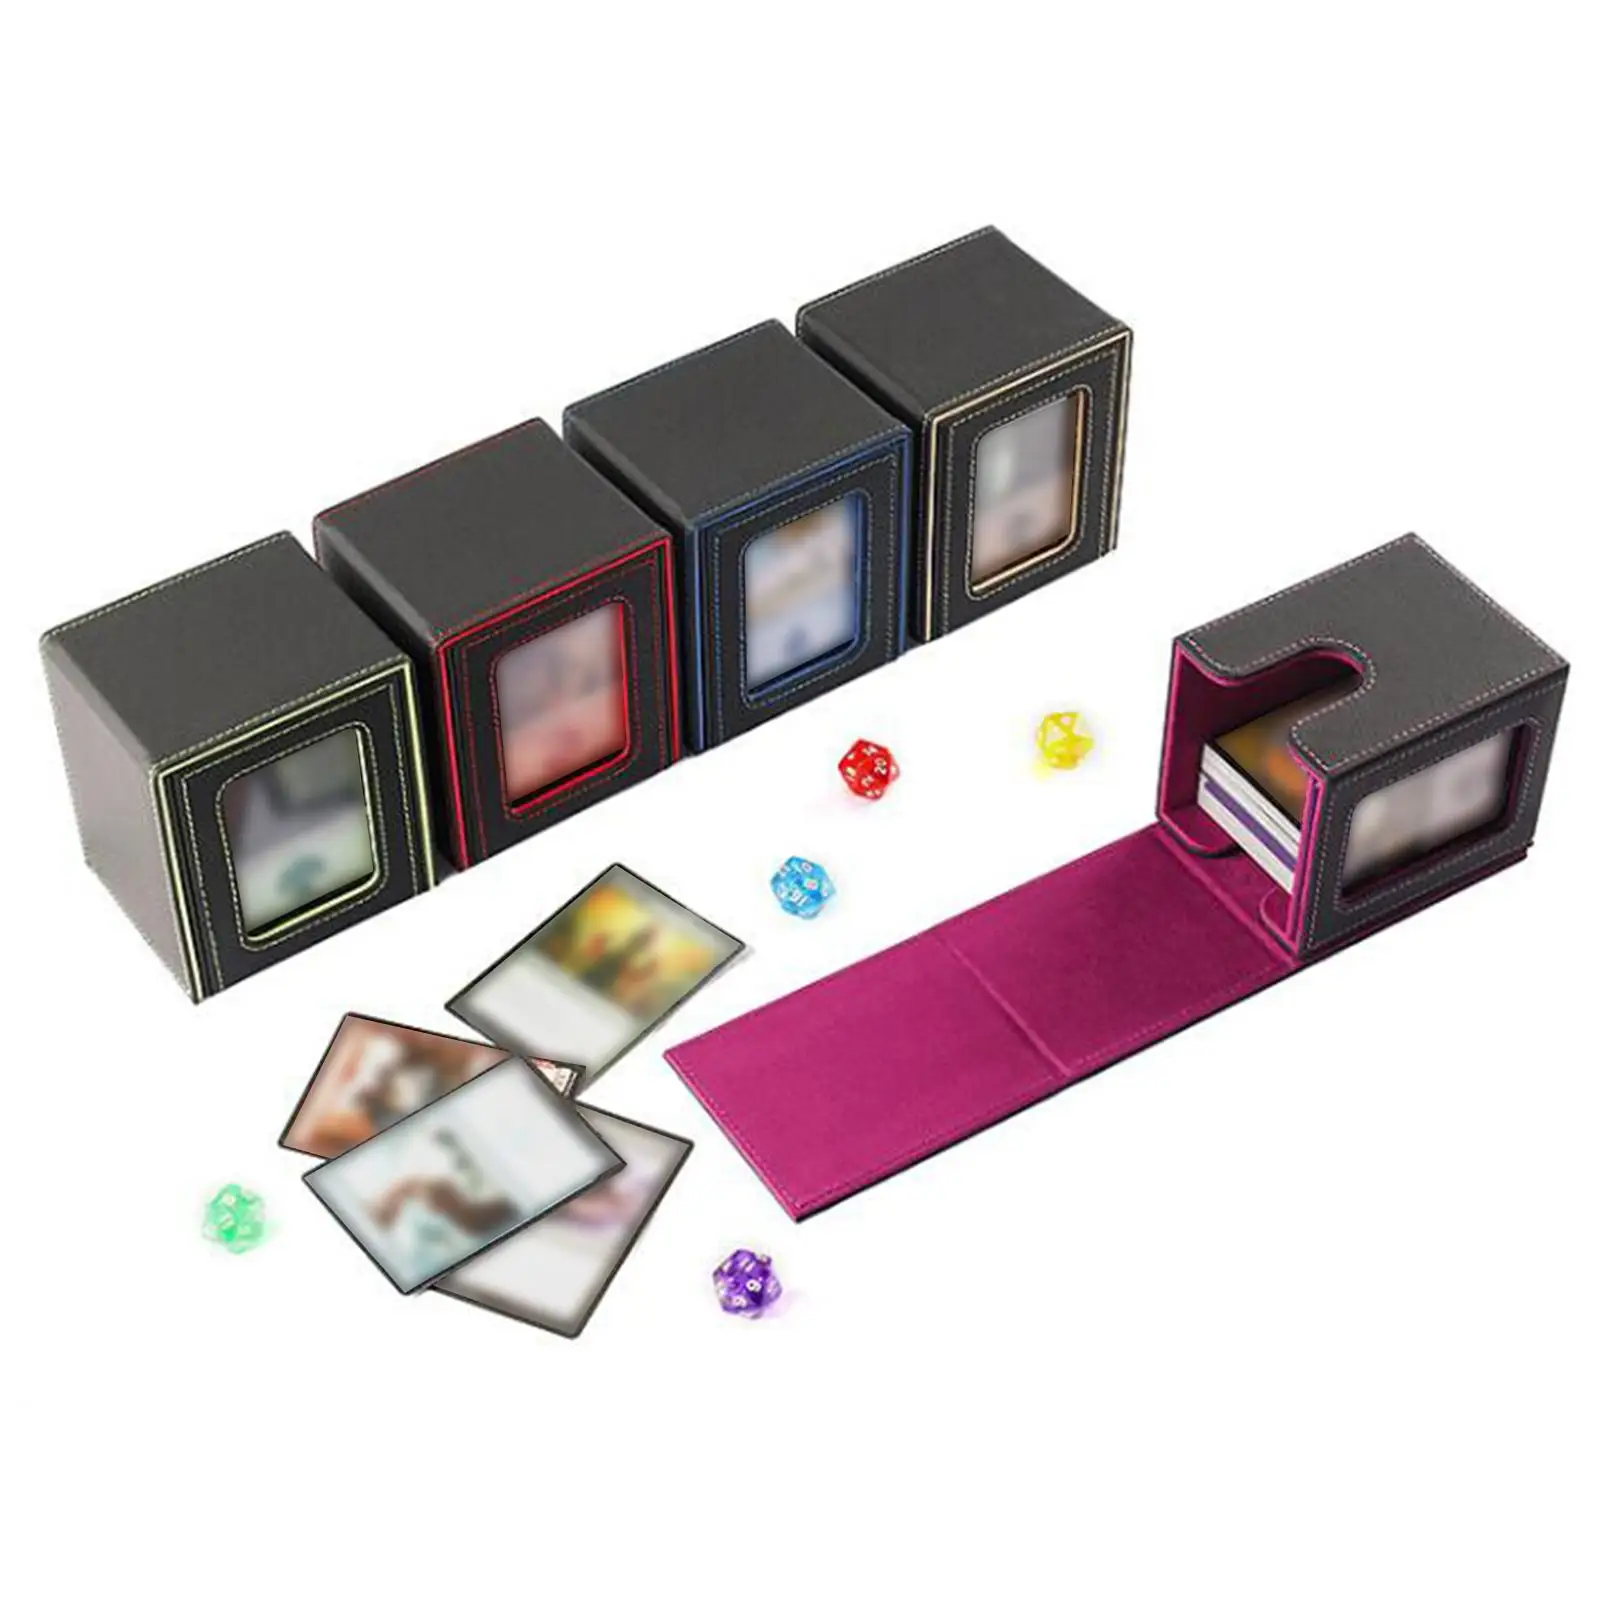  Trading Card Deck Box Card Deck Case Display Closure with 2 Movable Dividers for Collectible Cards Collection Cards 